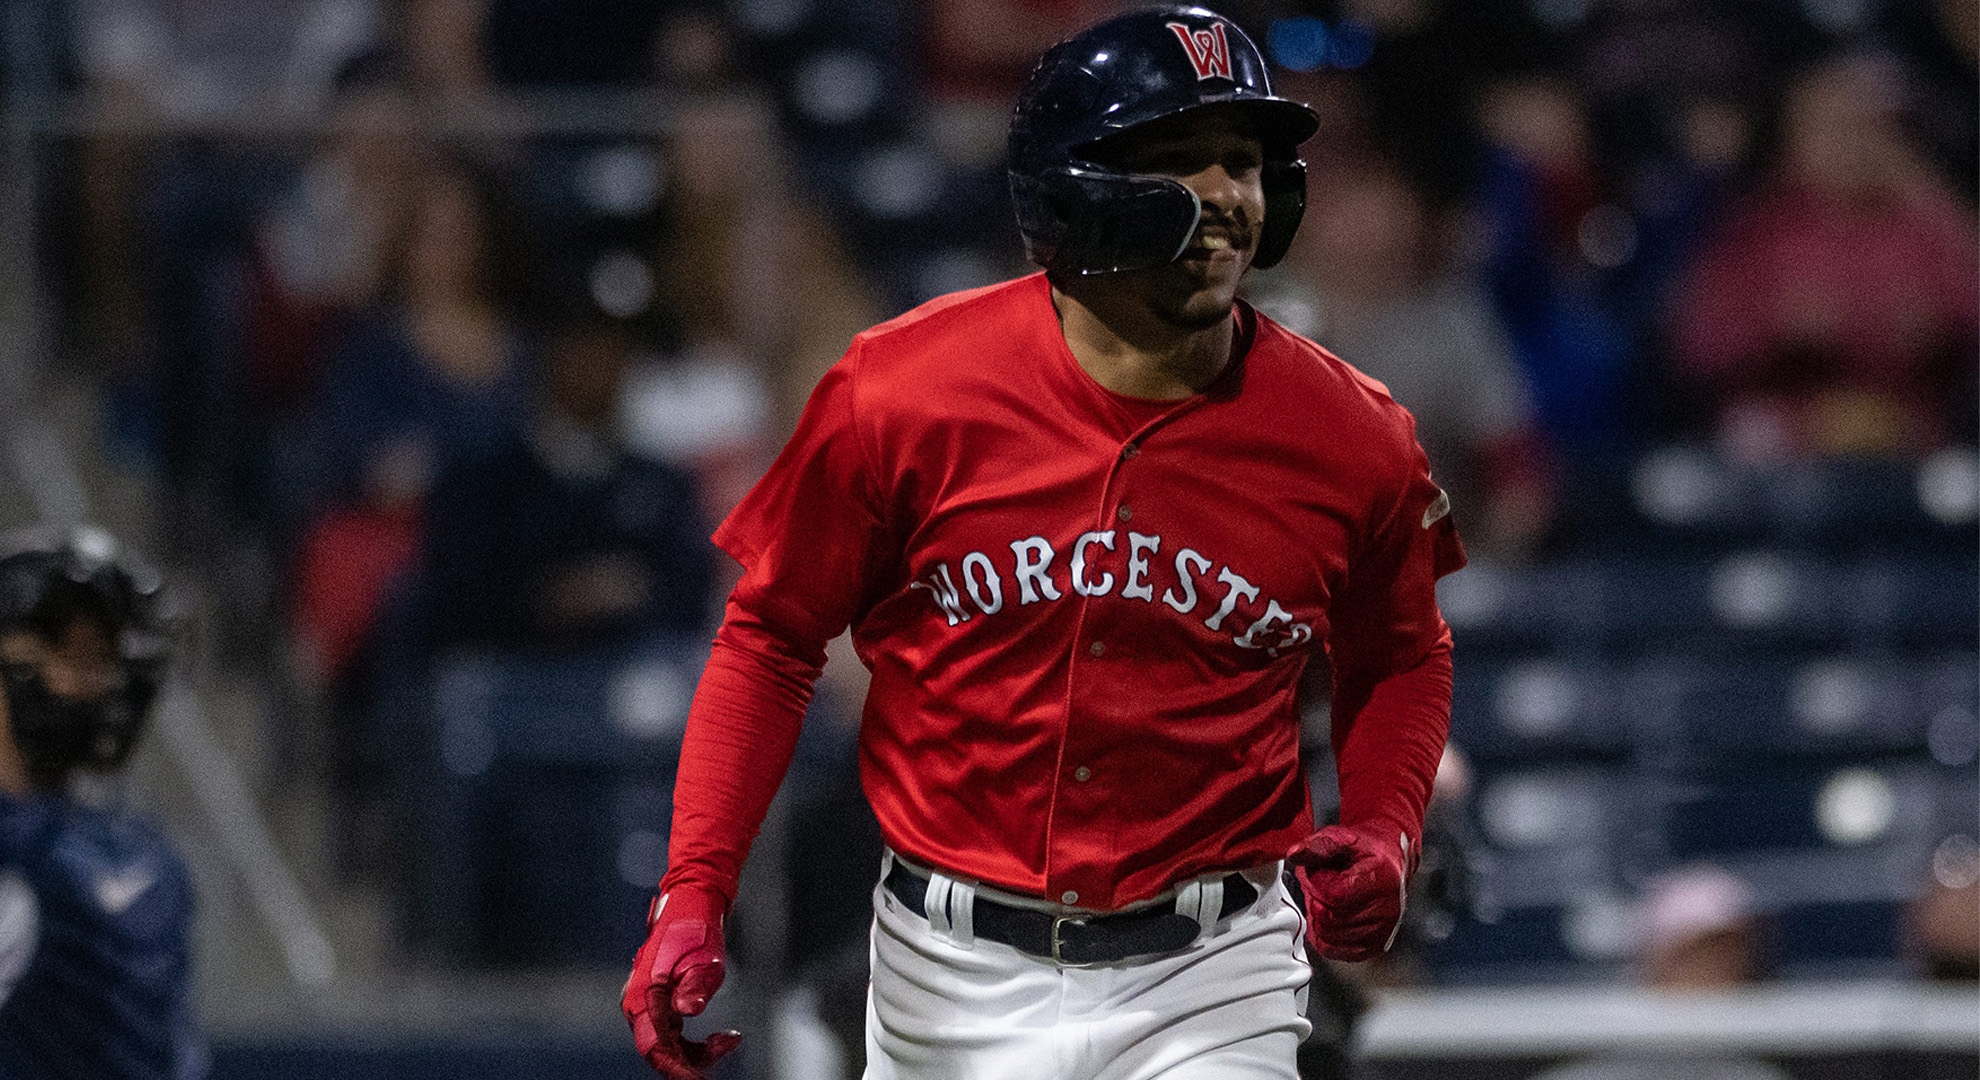 WooSox Offense Erupts With Flurry Of Home Runs In 17-9 Victory